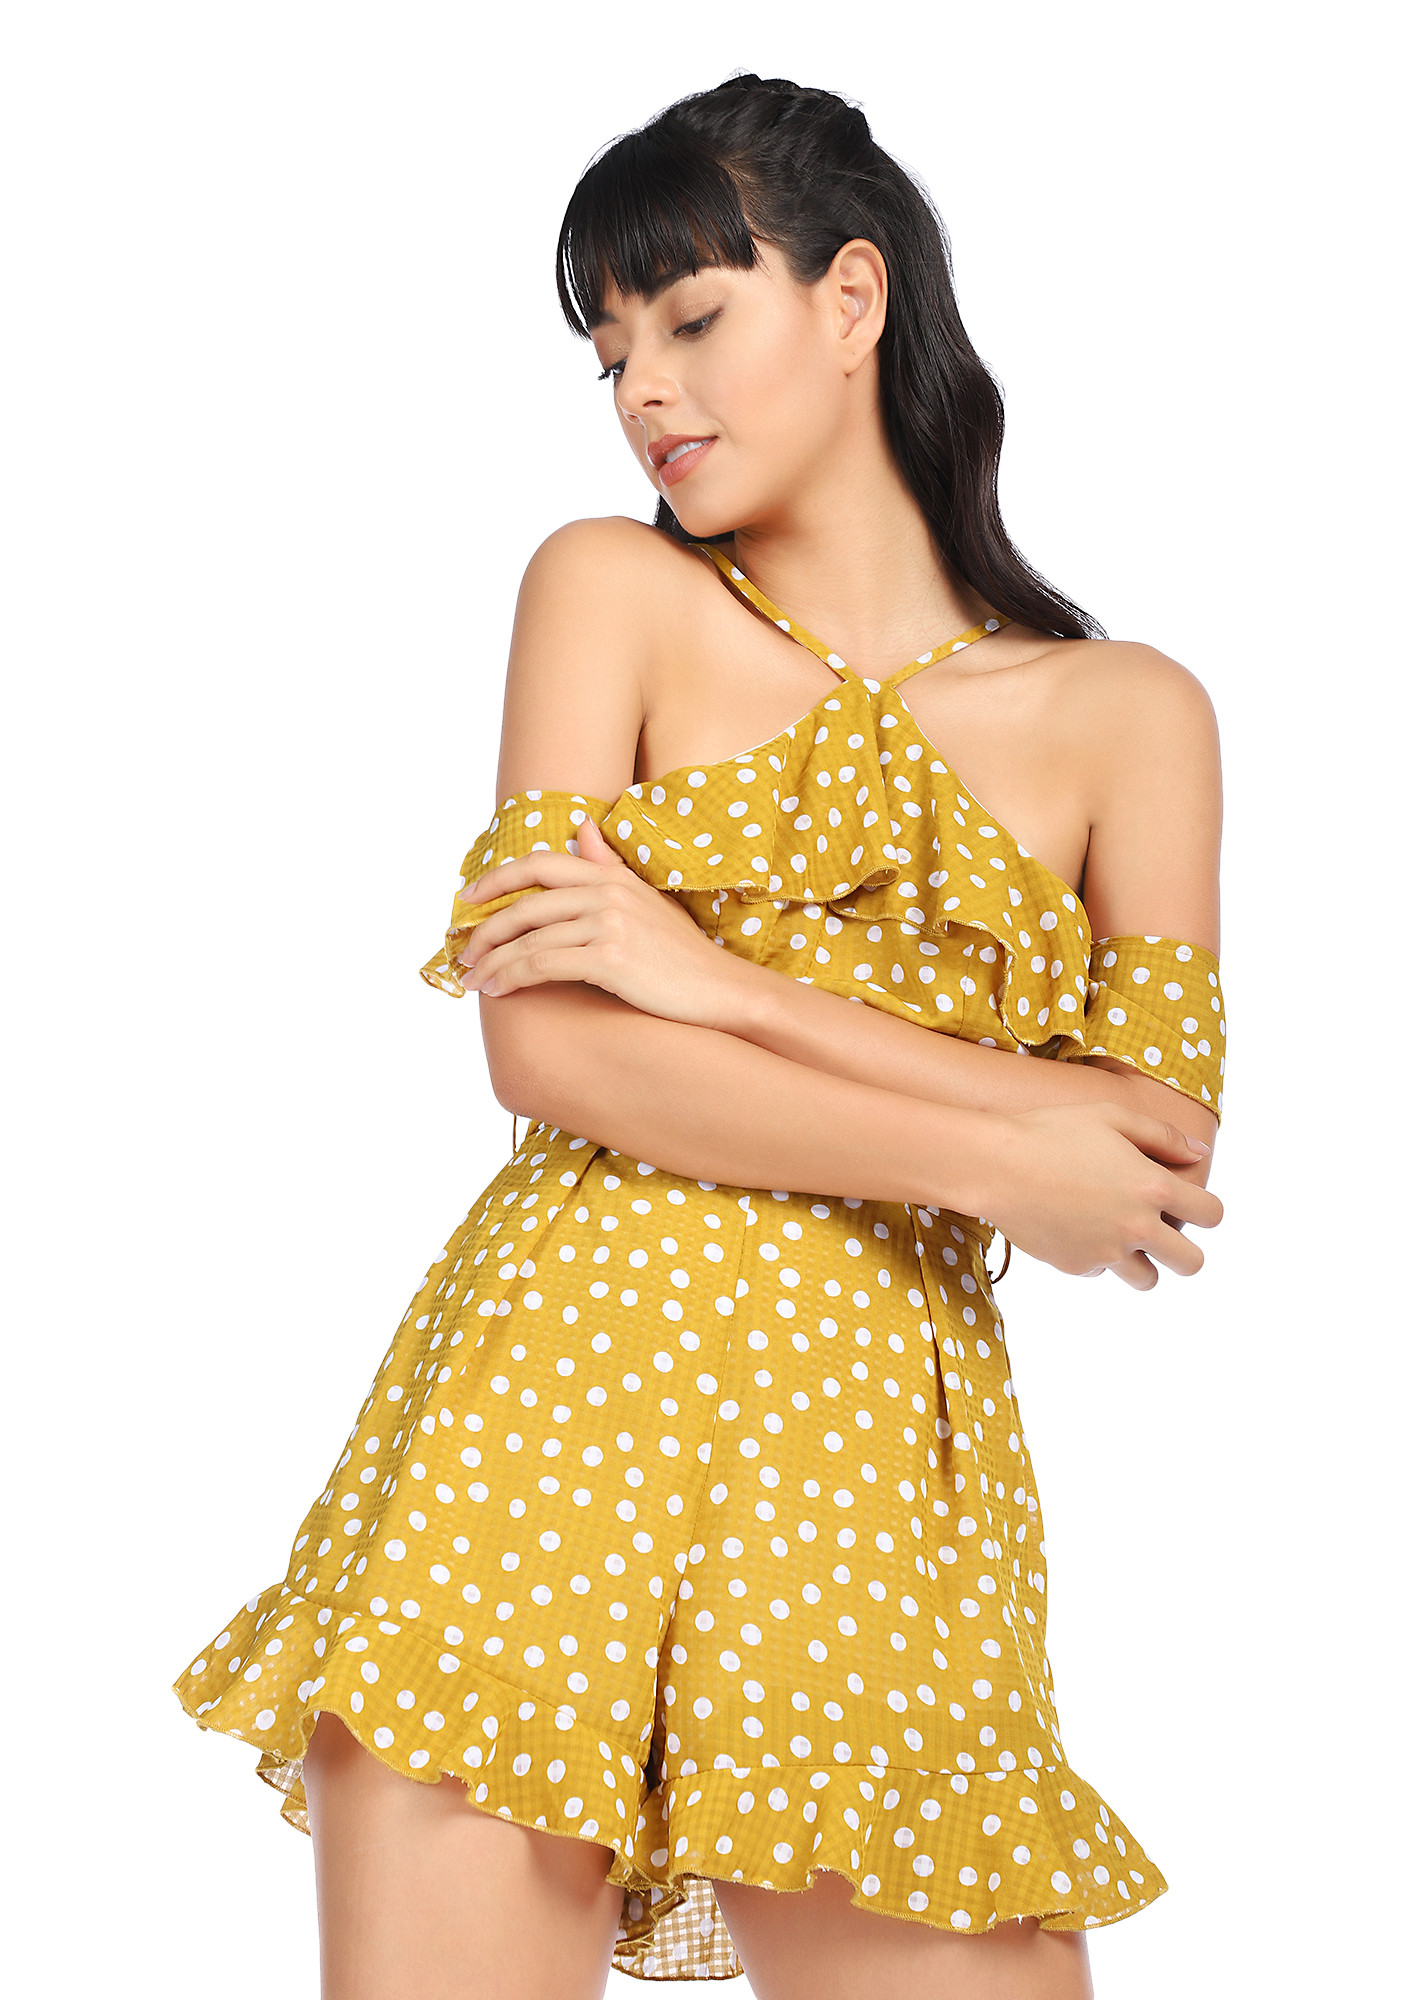 CAN'T MISS THOSE HOT SPOTS YELLOW ROMPER